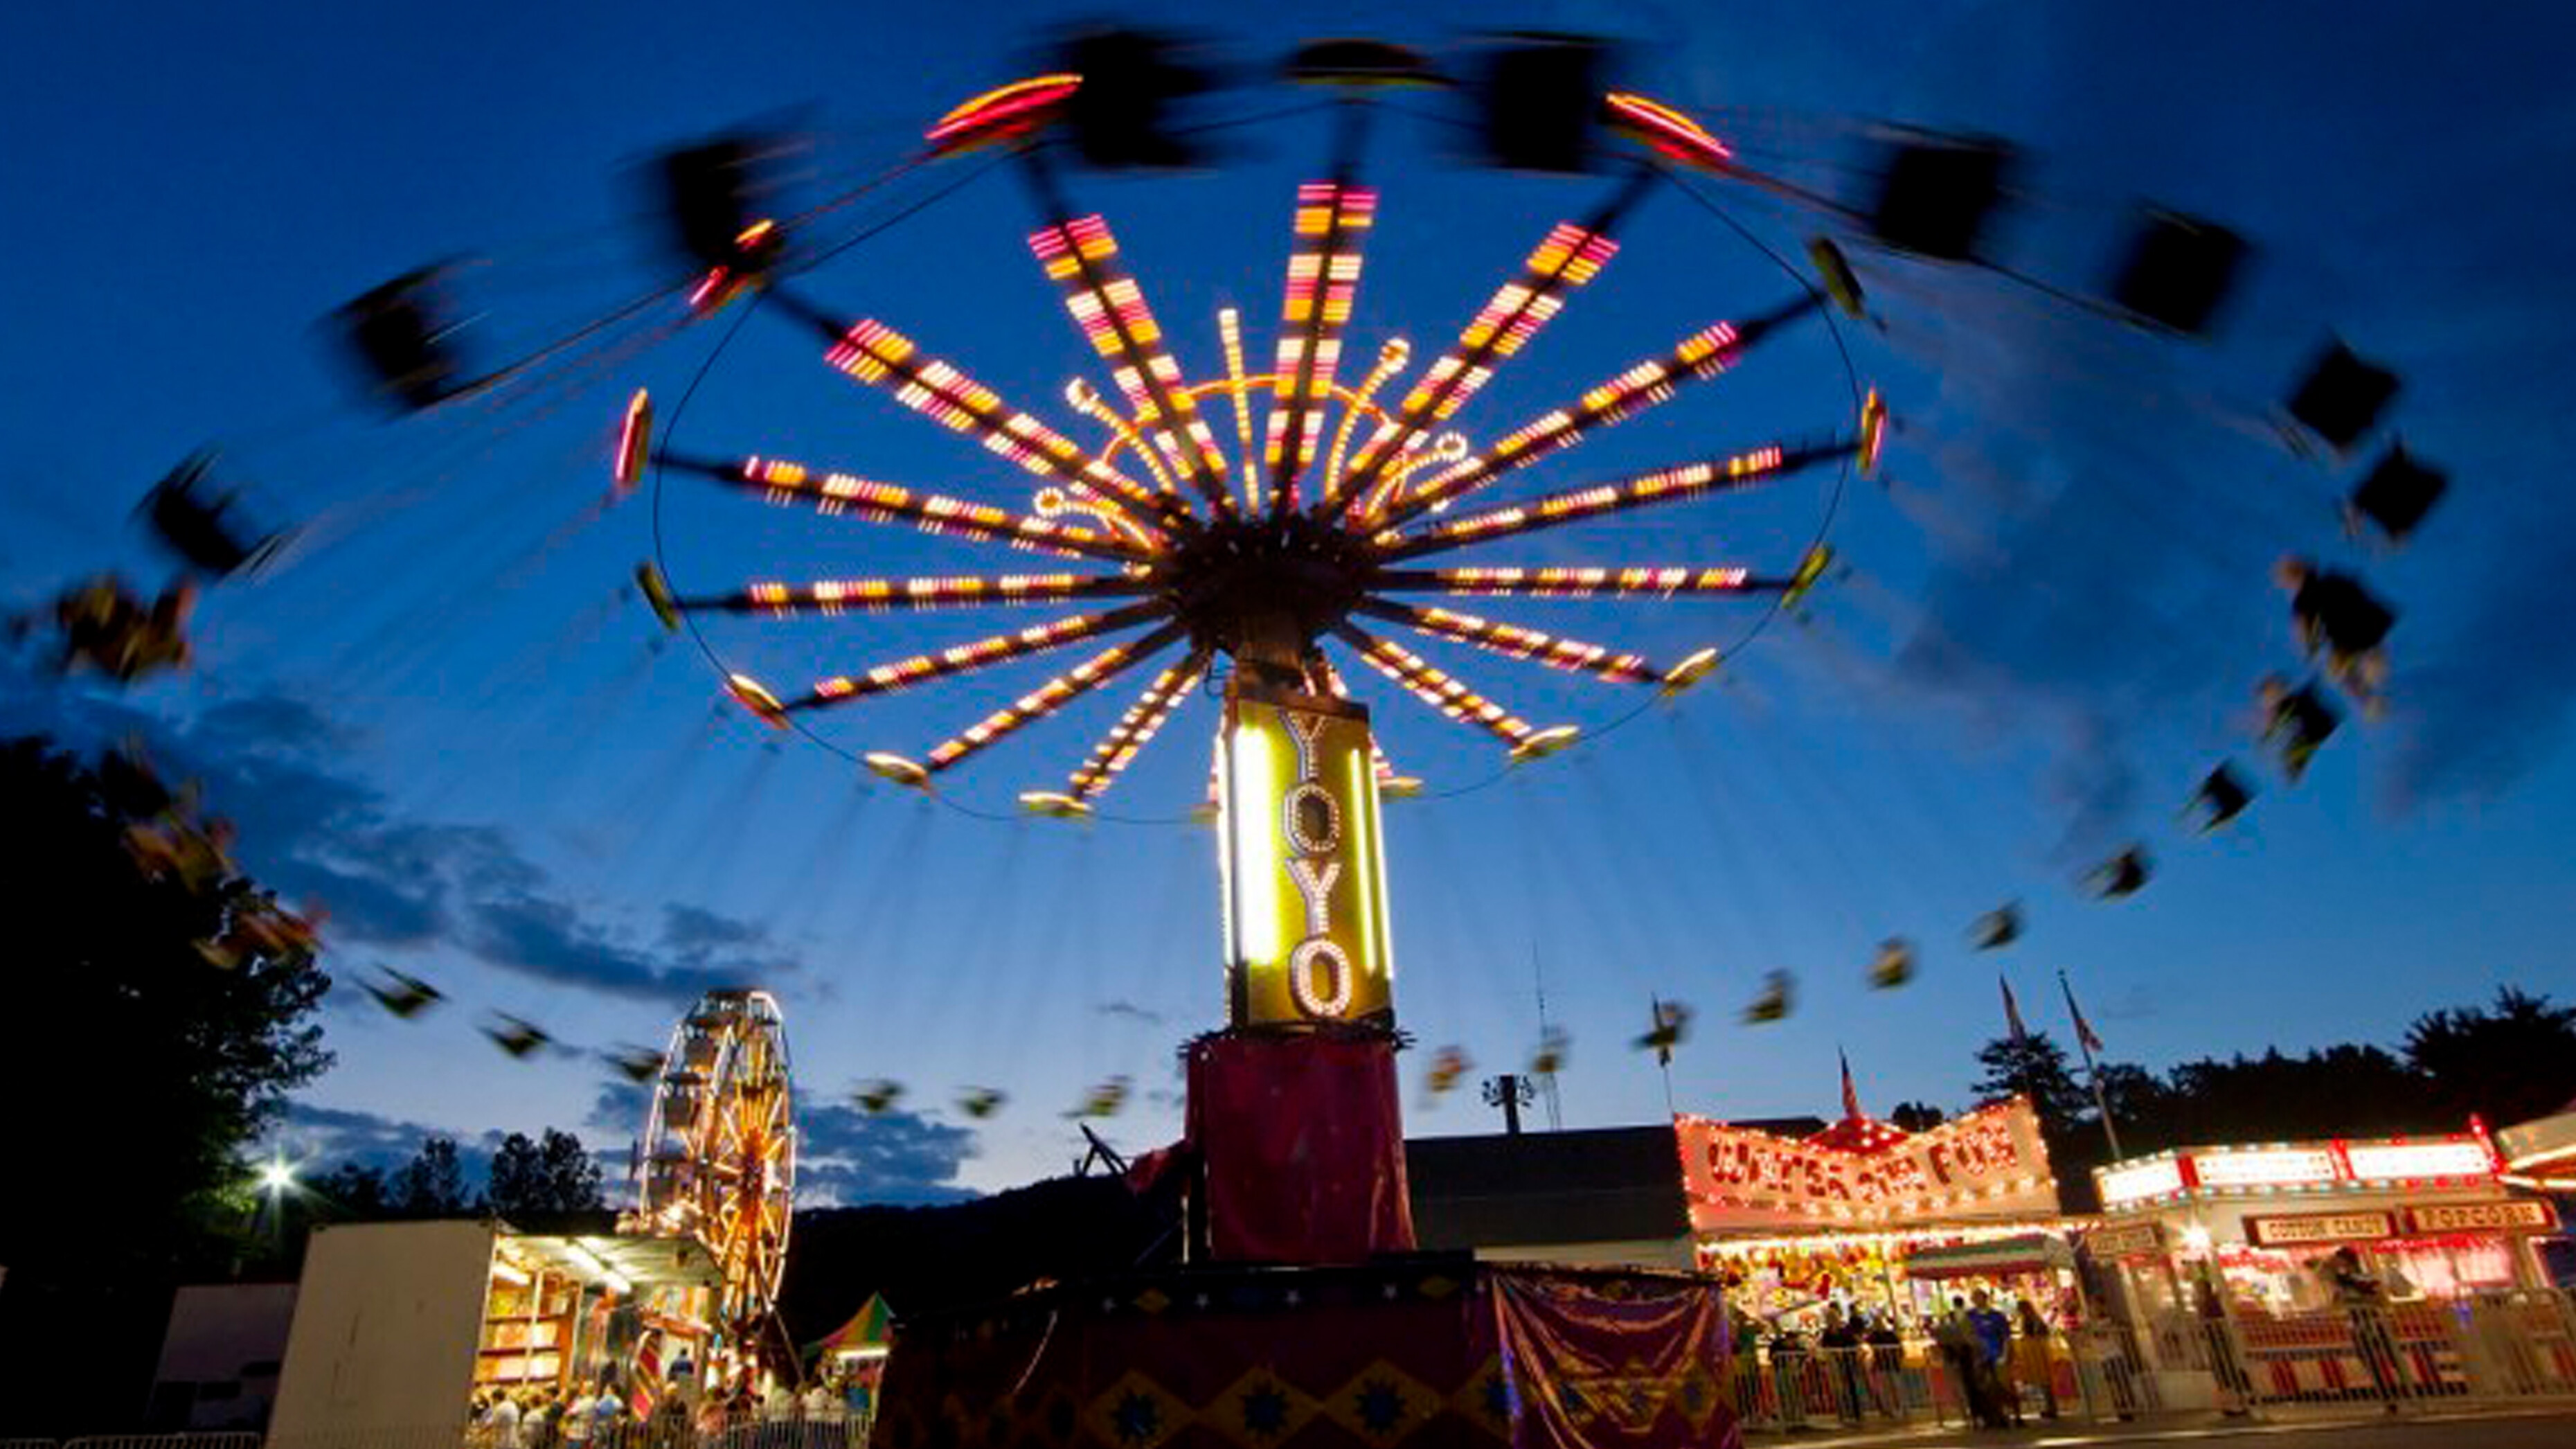 A spinning swings ride in motion at the Firemens Carnival in Beacon Falls CT